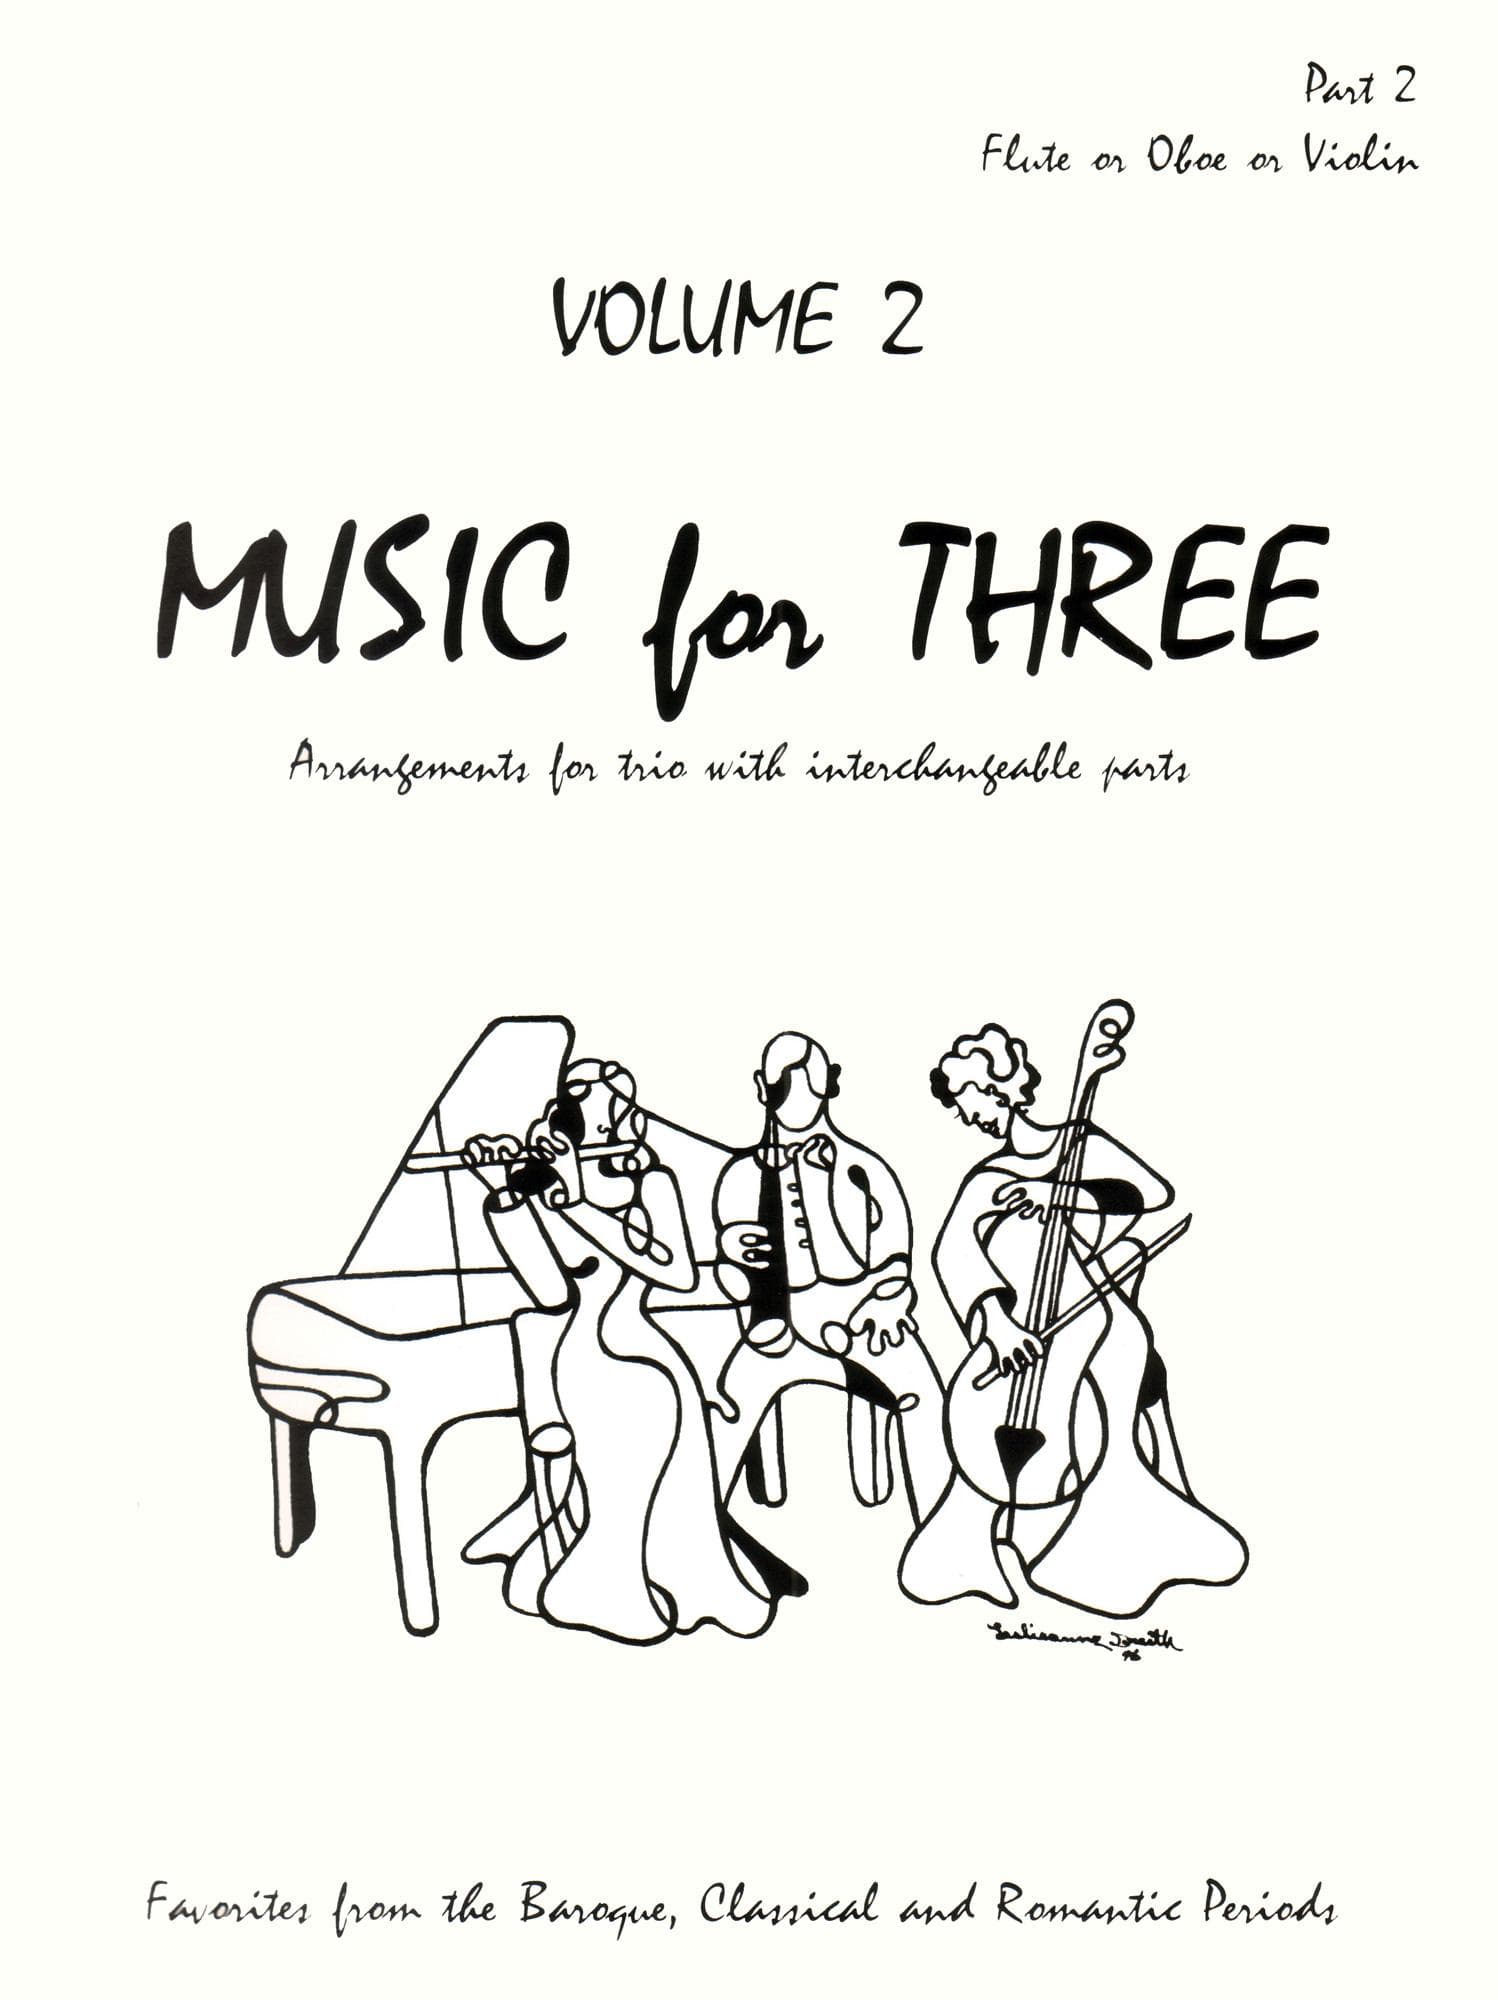 Music for Three Volume 2 Part 2 Violin, Oboe or Flute Published by Last Resort Music